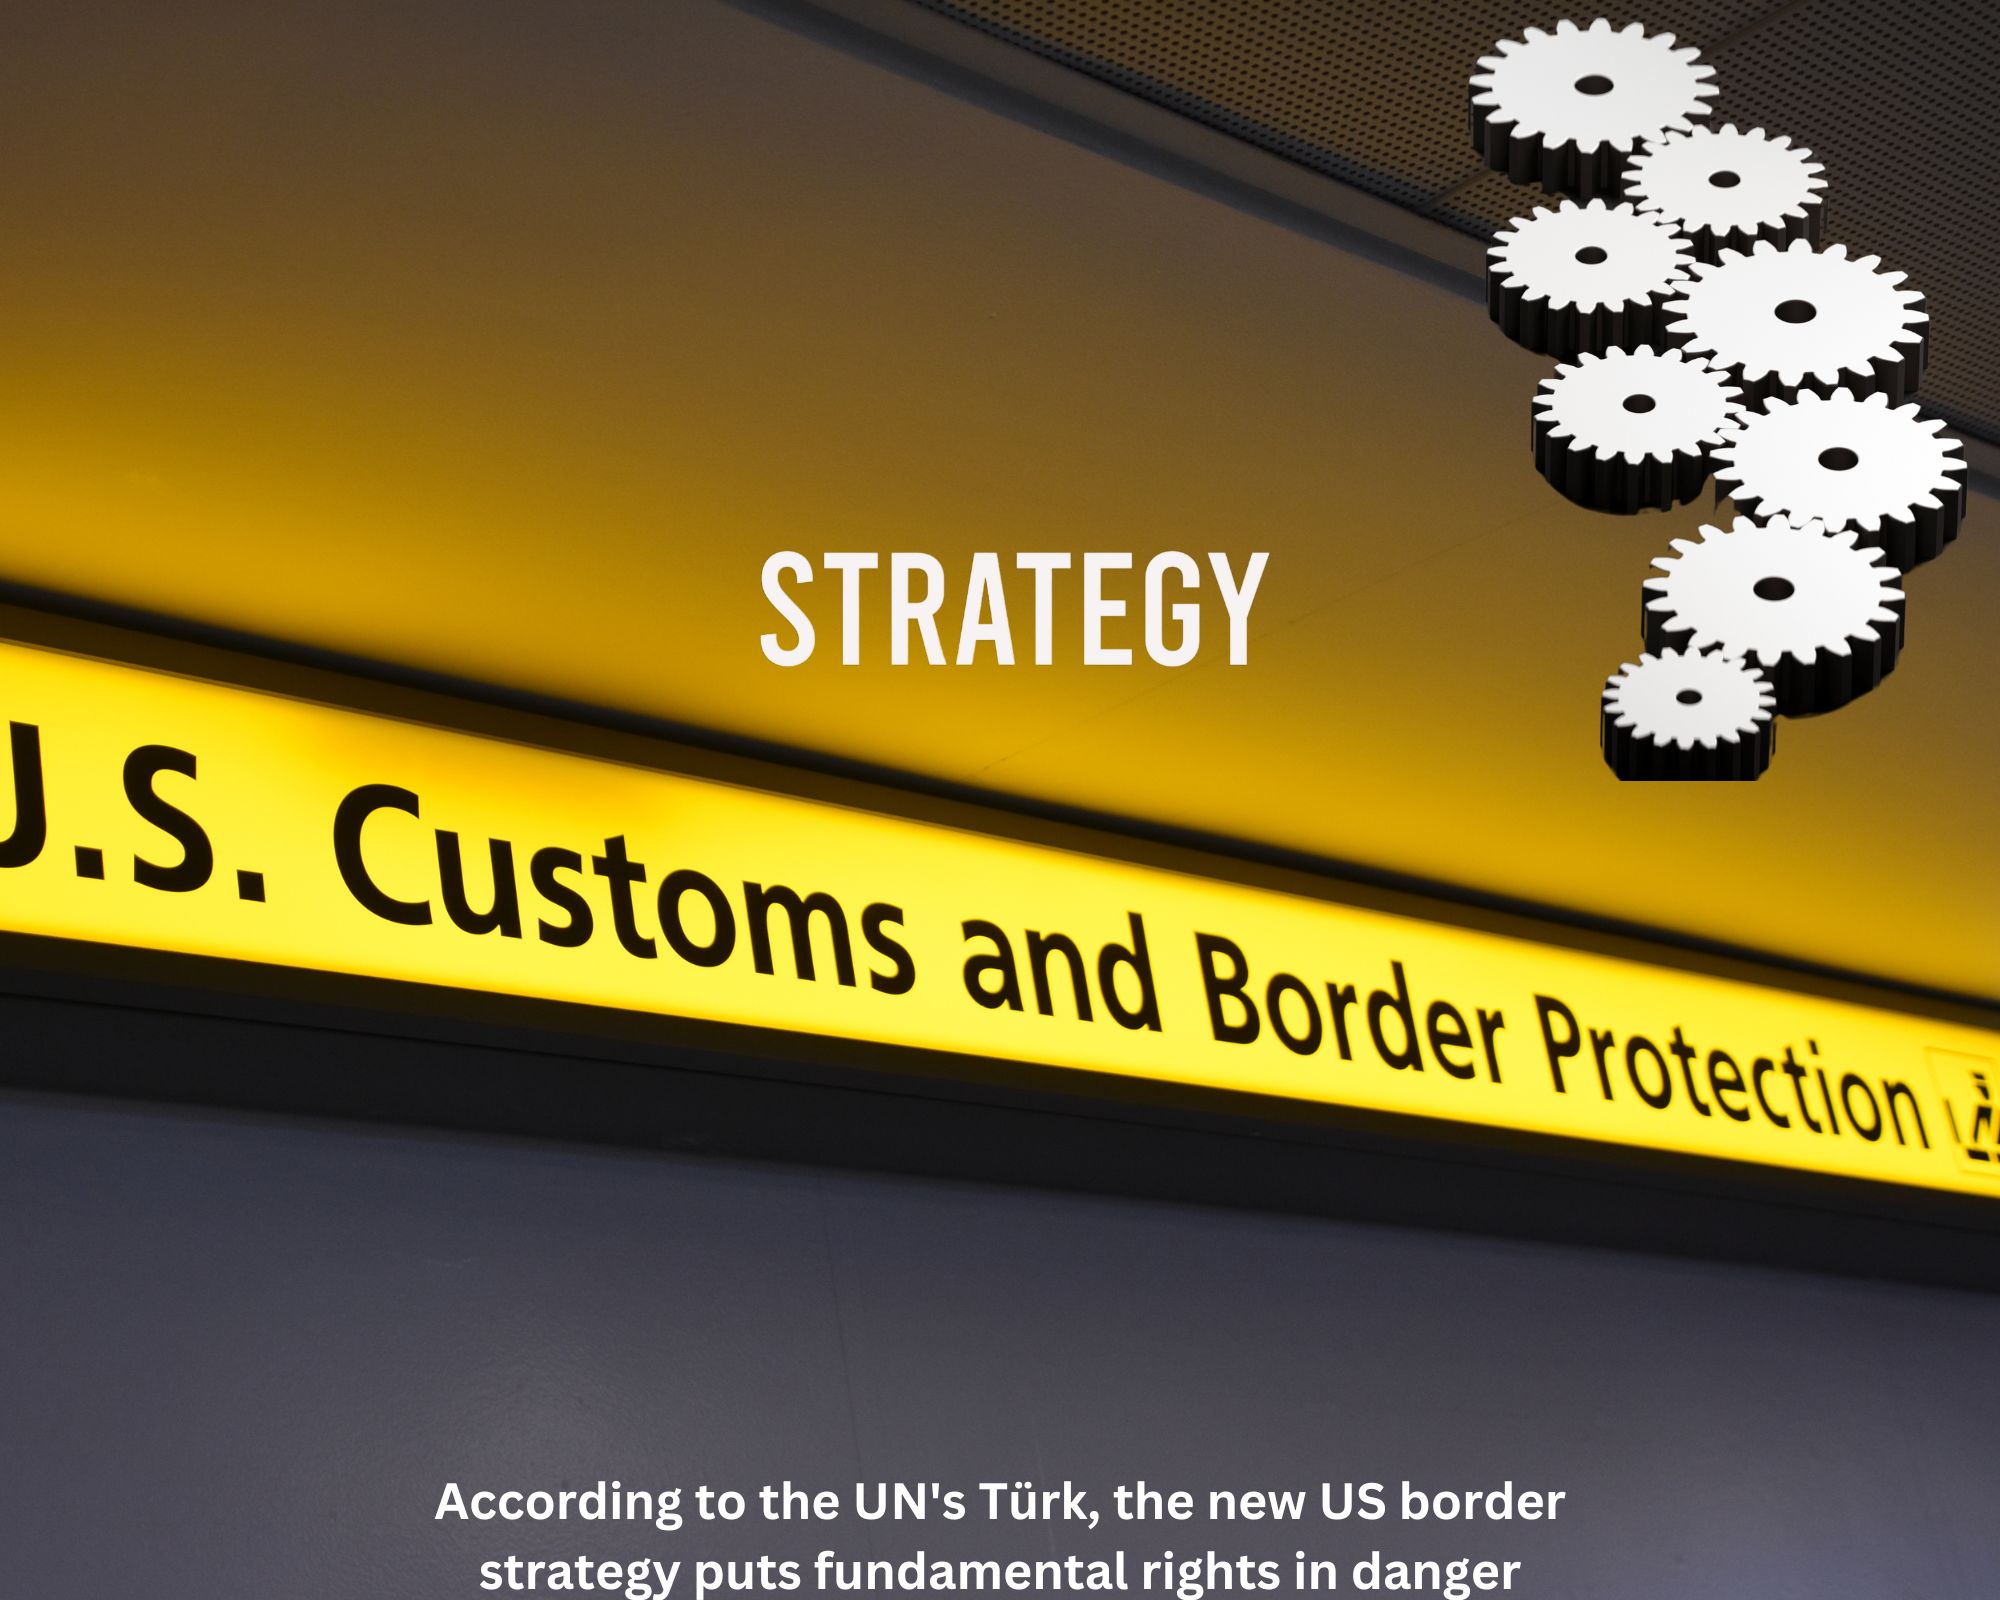 According to the UN's Türk, the new US border strategy puts fundamental rights in danger